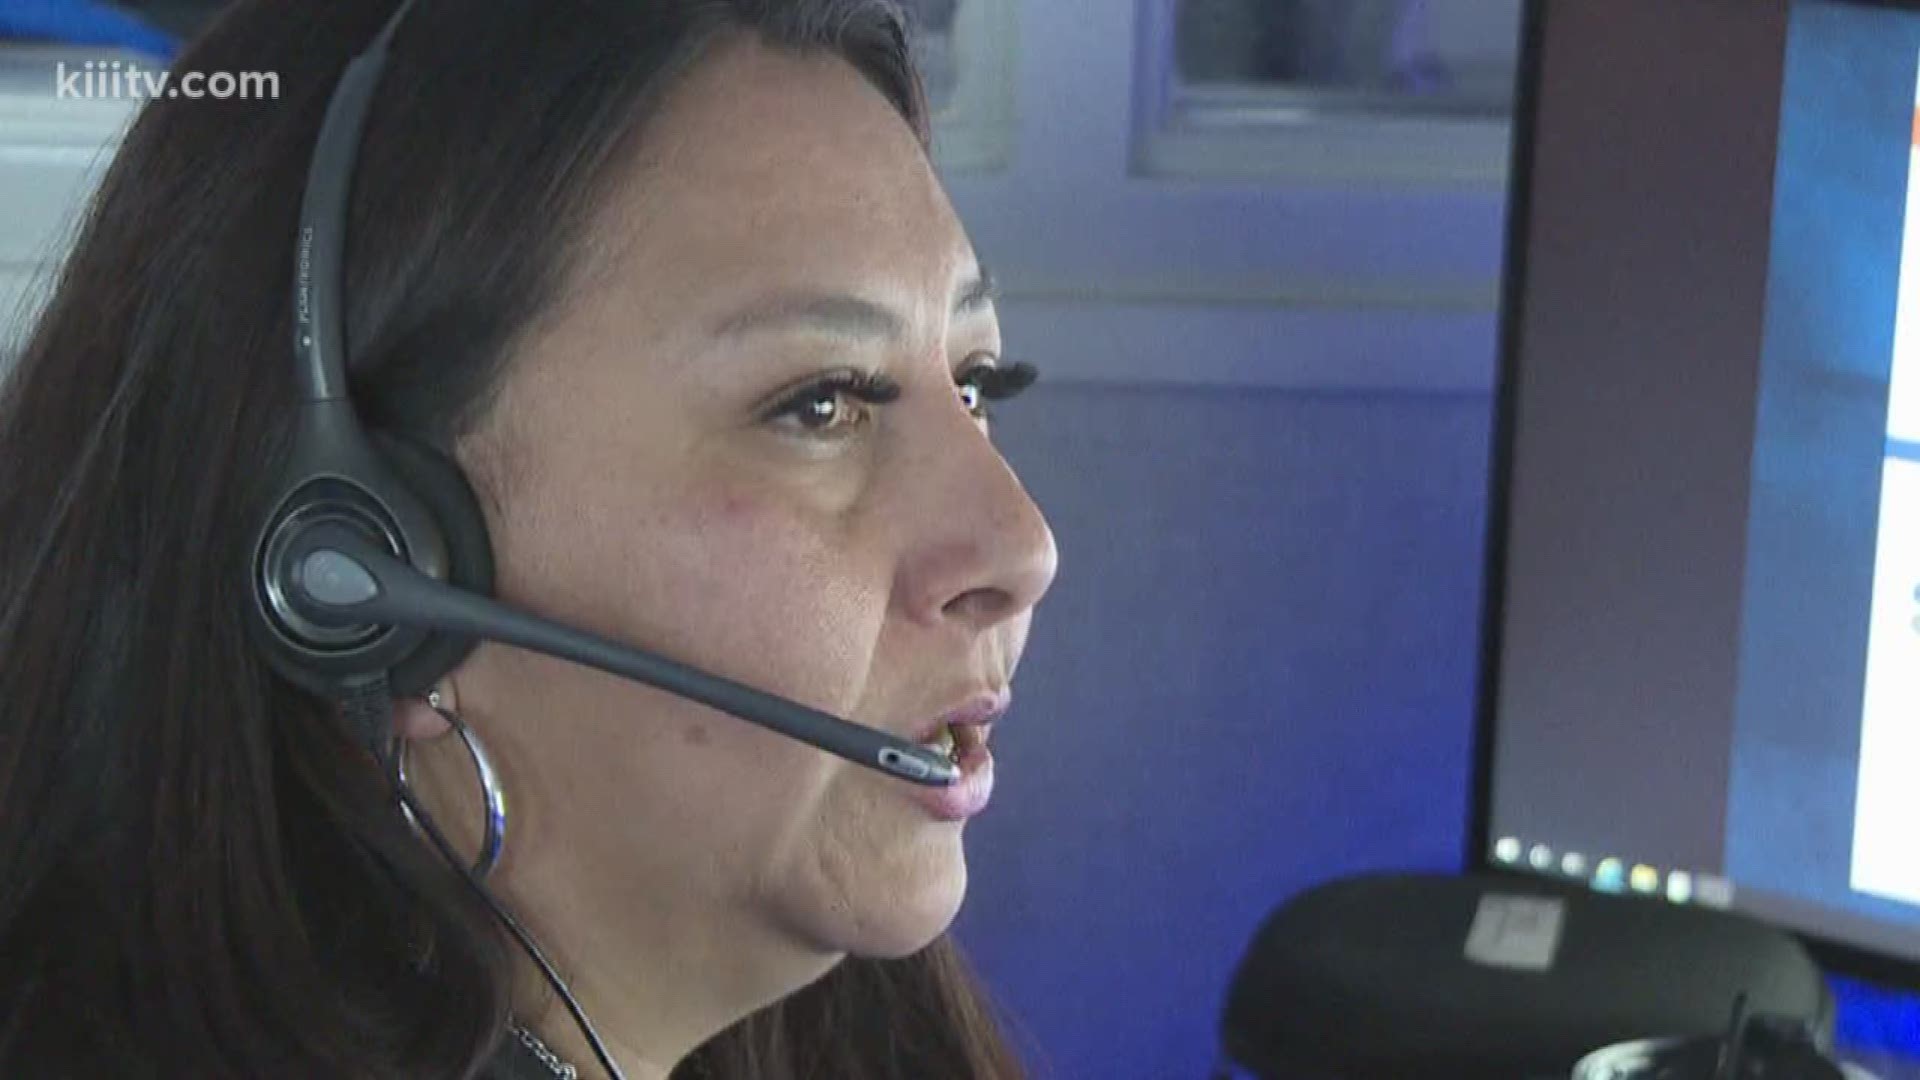 9-1-1 Dispatchers are usually the first point of contact when people need help during an emergency.

Metrocom's Dispatch Team serves 340,000 citizens in Nueces County, and the number is steadily growing as the city's population increases.